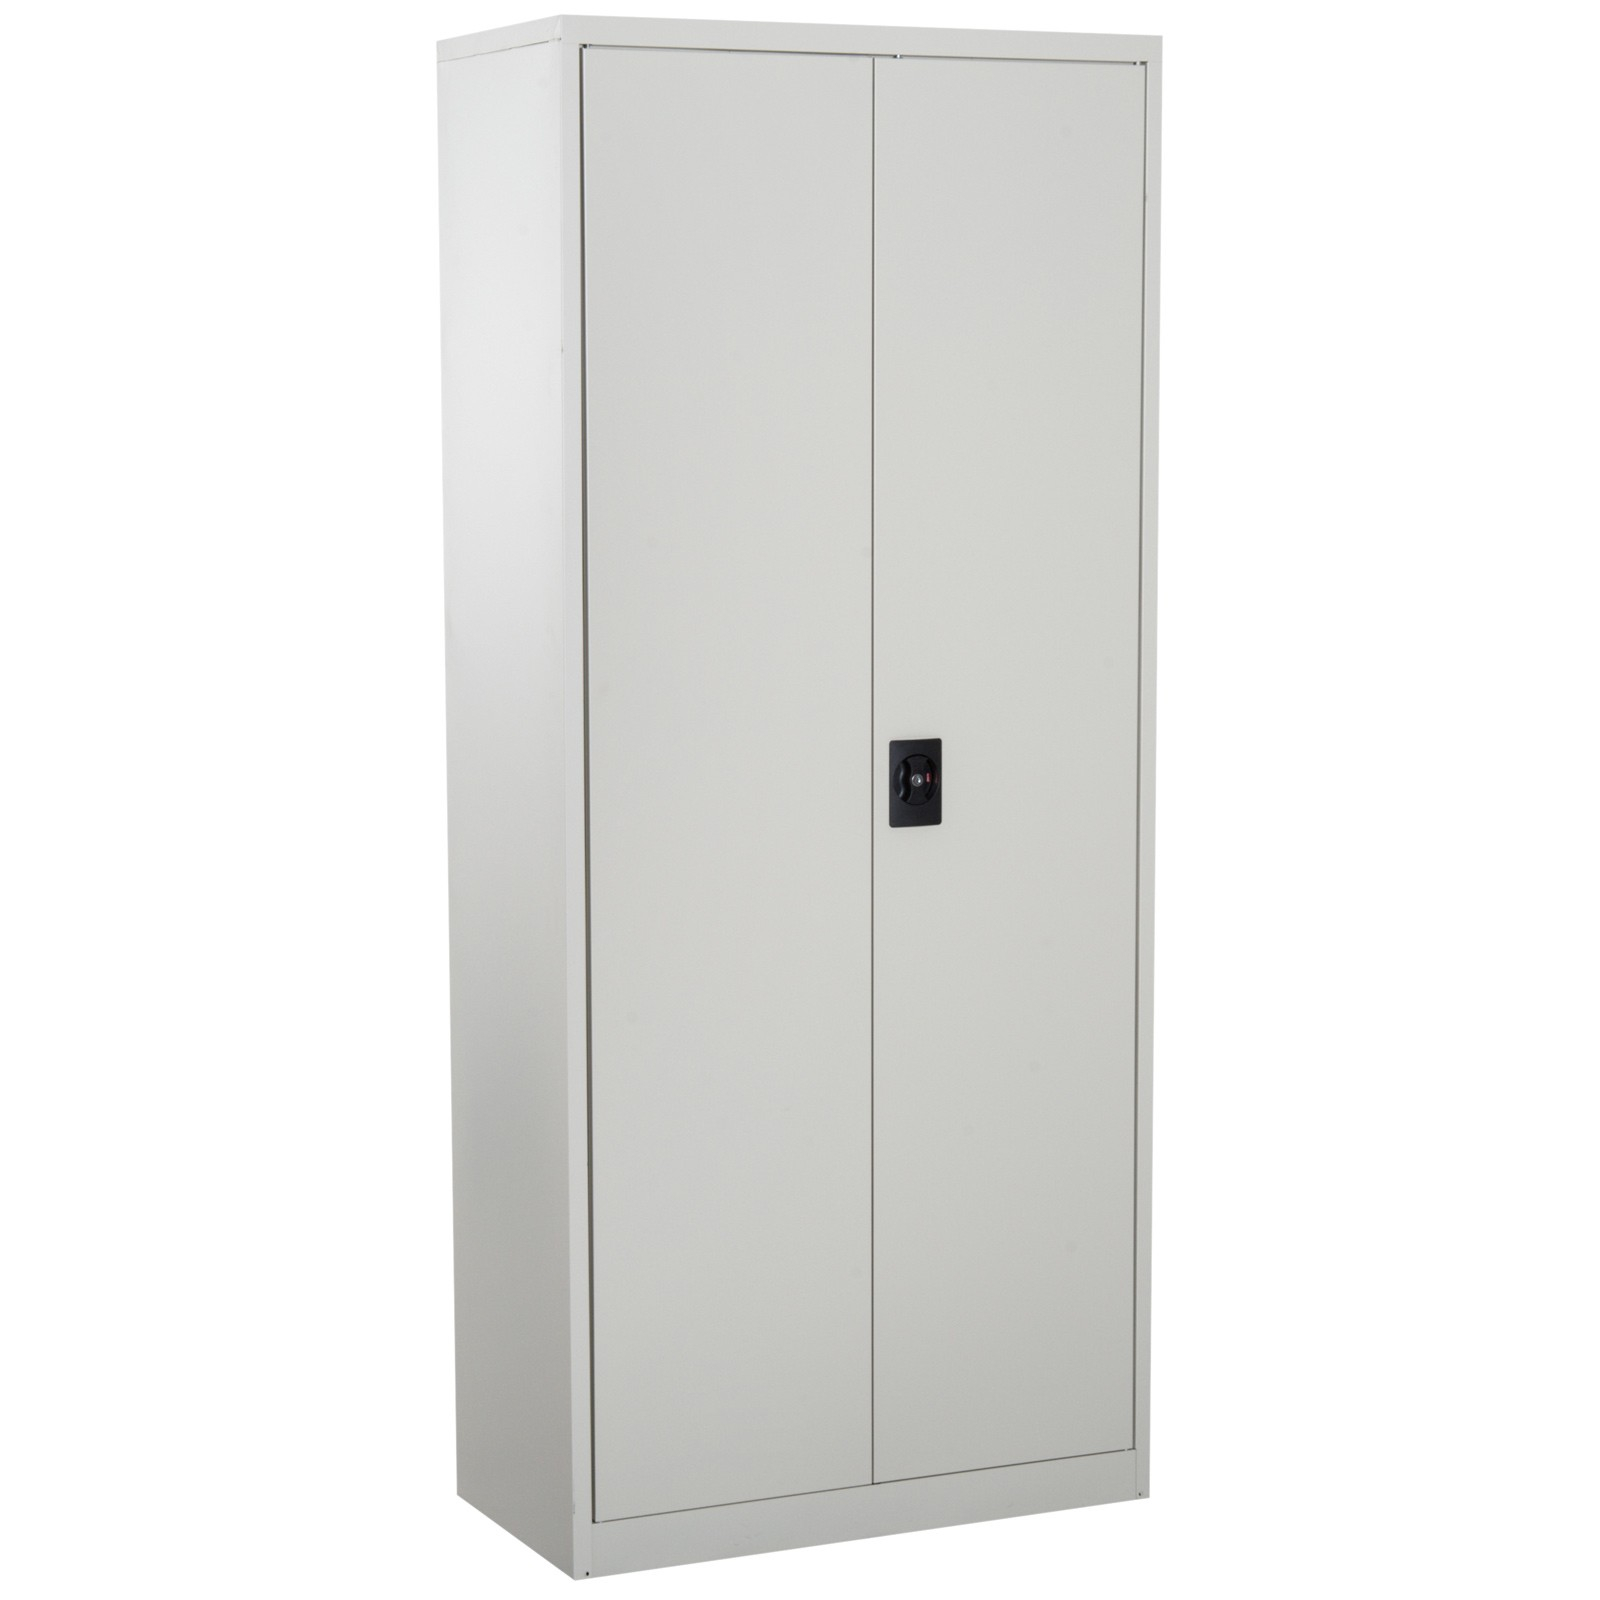 Vinsetto Filing Cabinet Storage Unit 2 Doors 5 Compartments Adjustable Shelf Cream White throughout dimensions 1600 X 1600